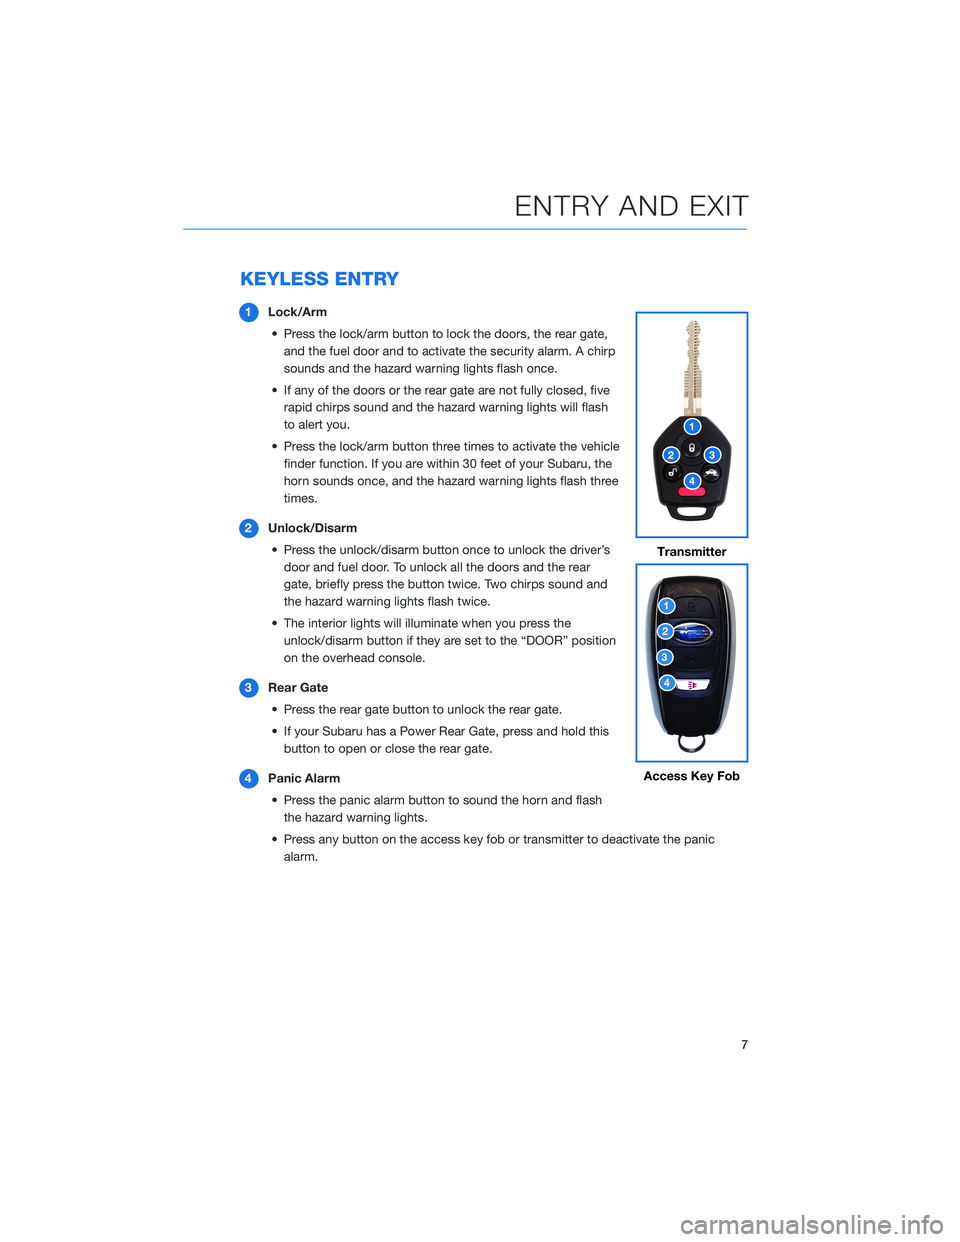 SUBARU ASCENT 2021  Getting Started Guide KEYLESS ENTRY
1Lock/Arm
• Press the lock/arm button to lock the doors, the rear gate,
and the fuel door and to activate the security alarm. A chirp
sounds and the hazard warning lights flash once.
�